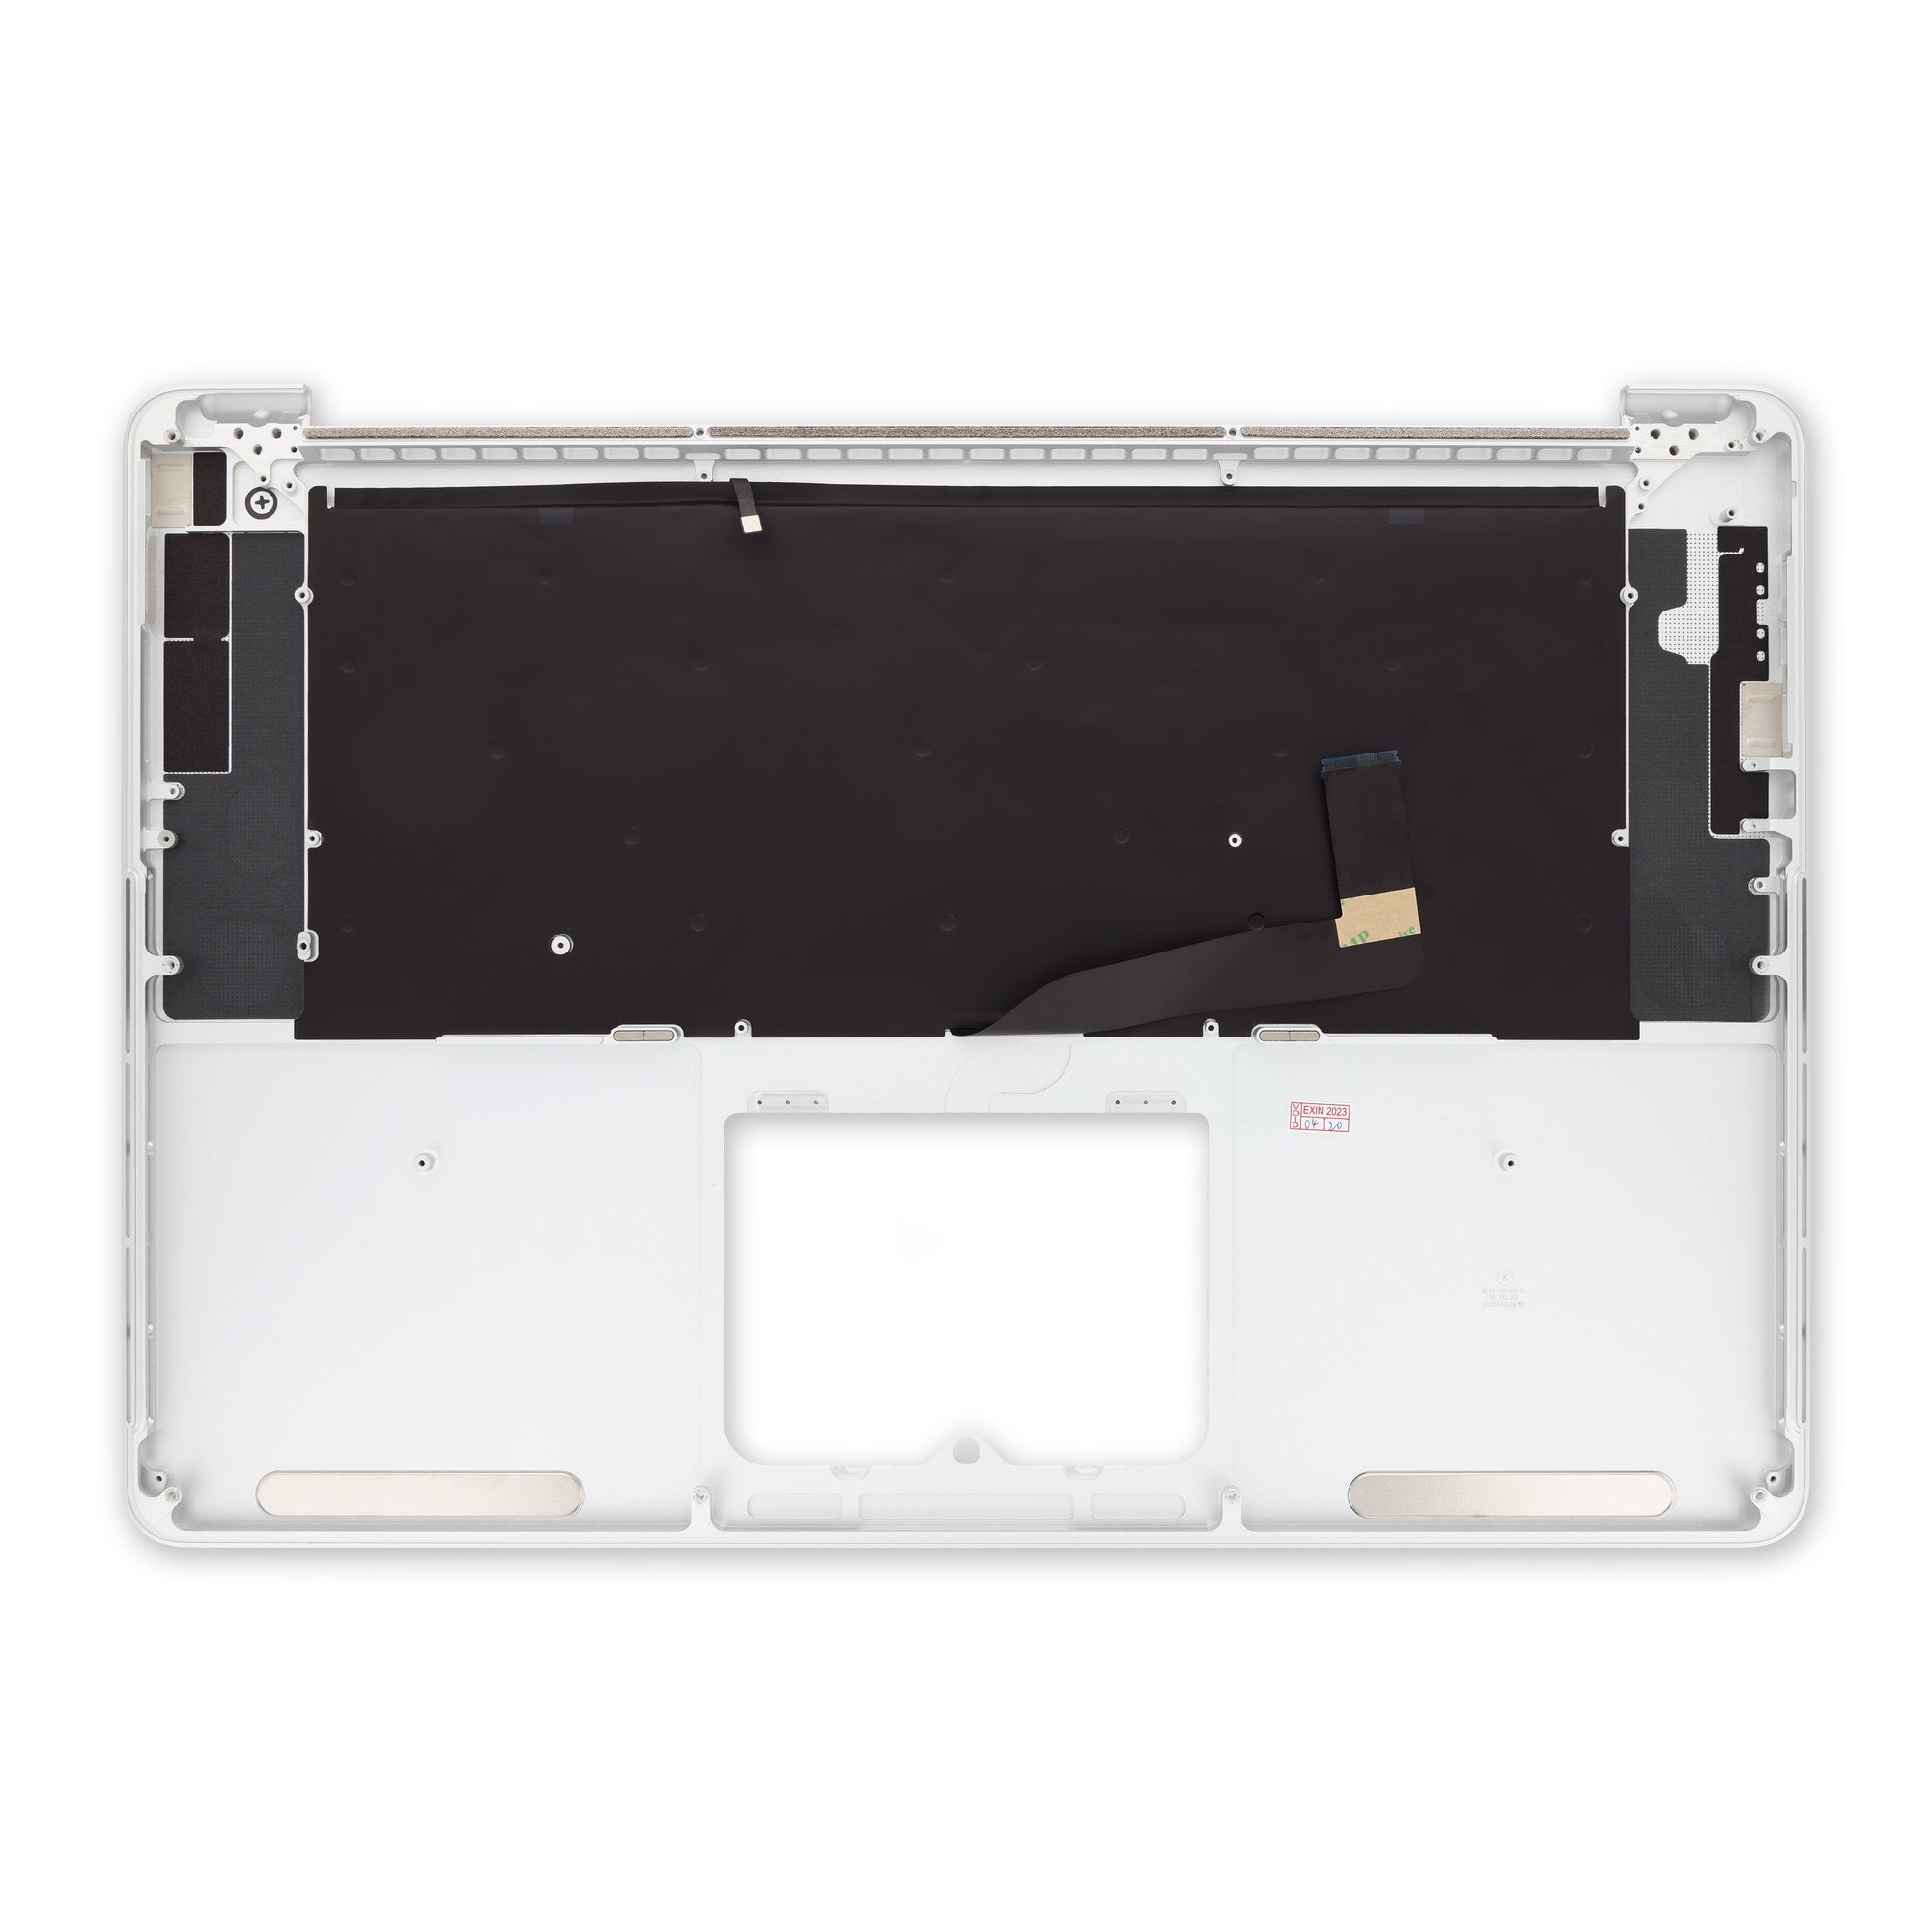 MacBook Pro 15" Retina (Mid 2012-Early 2013) Upper Case Assembly Used, A-Stock No Trackpad or Battery